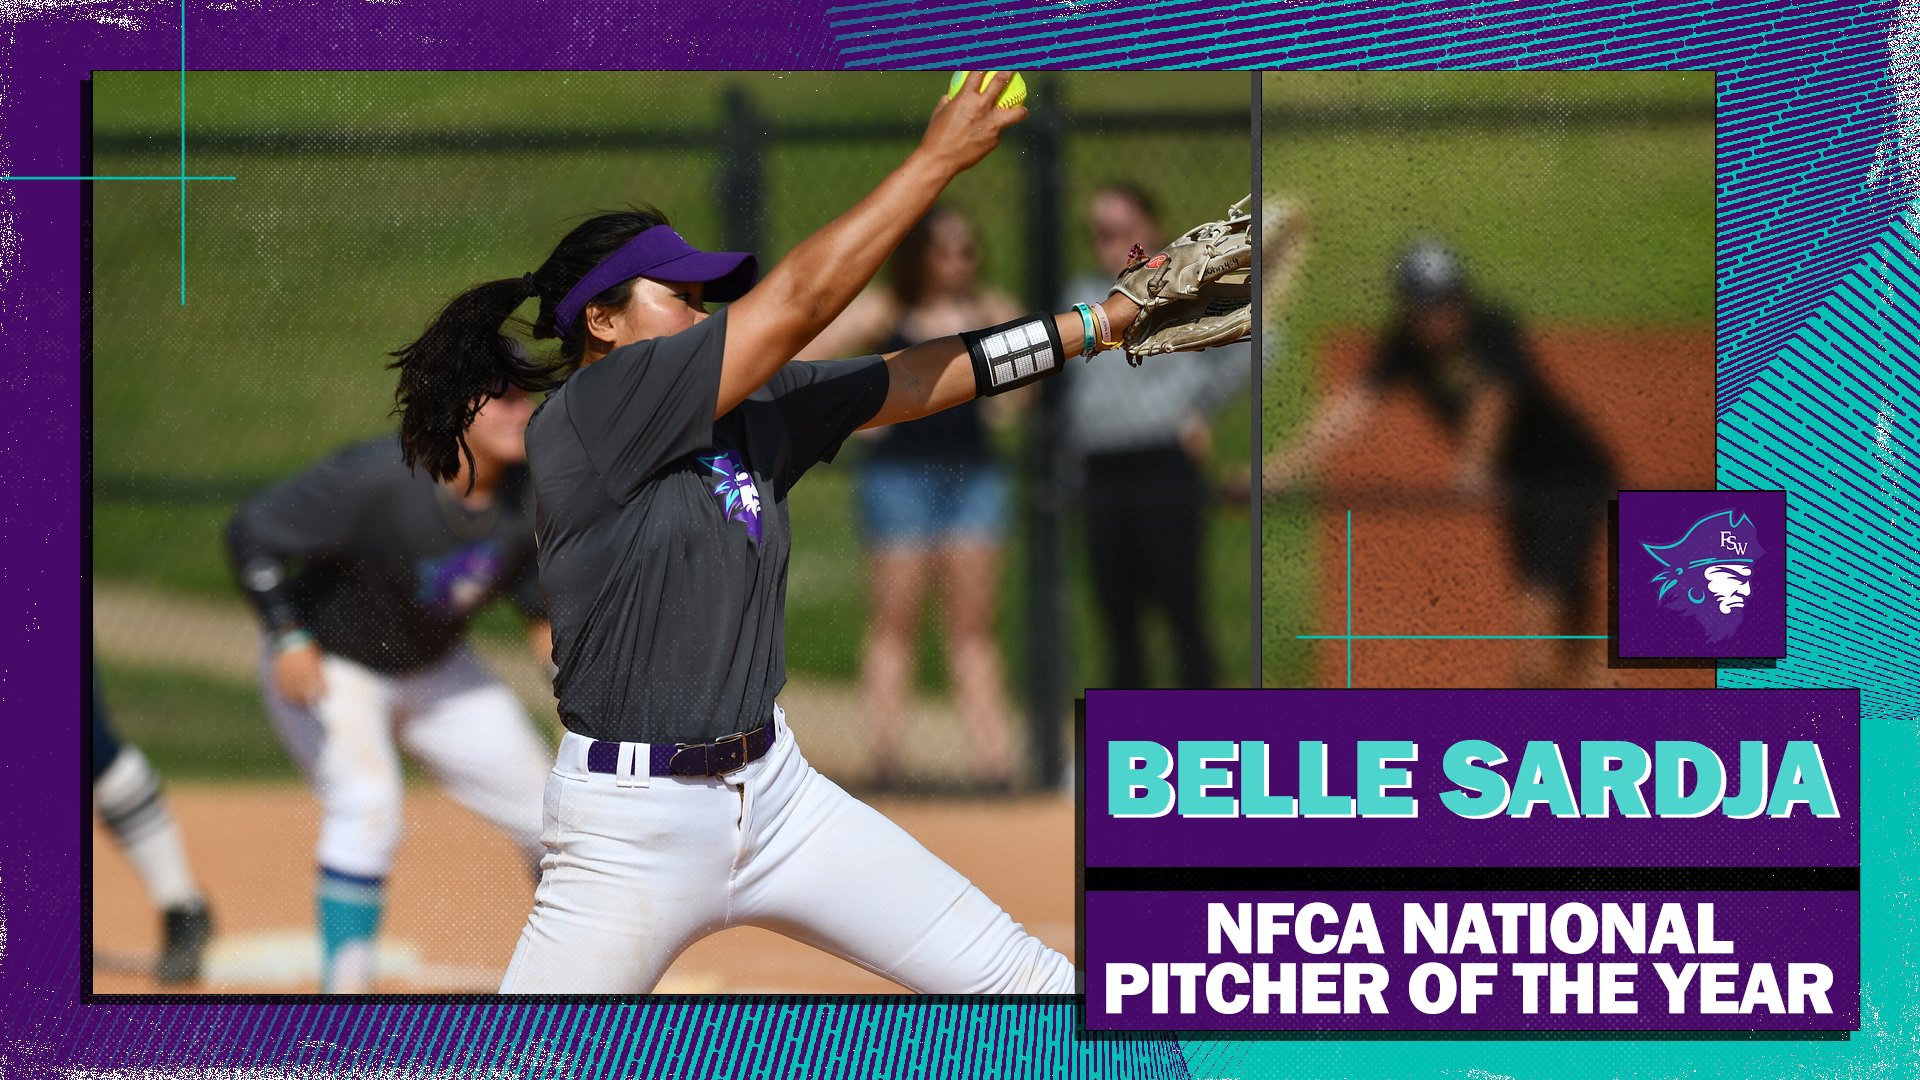 Sardja Named NFCA National Pitcher of the Year